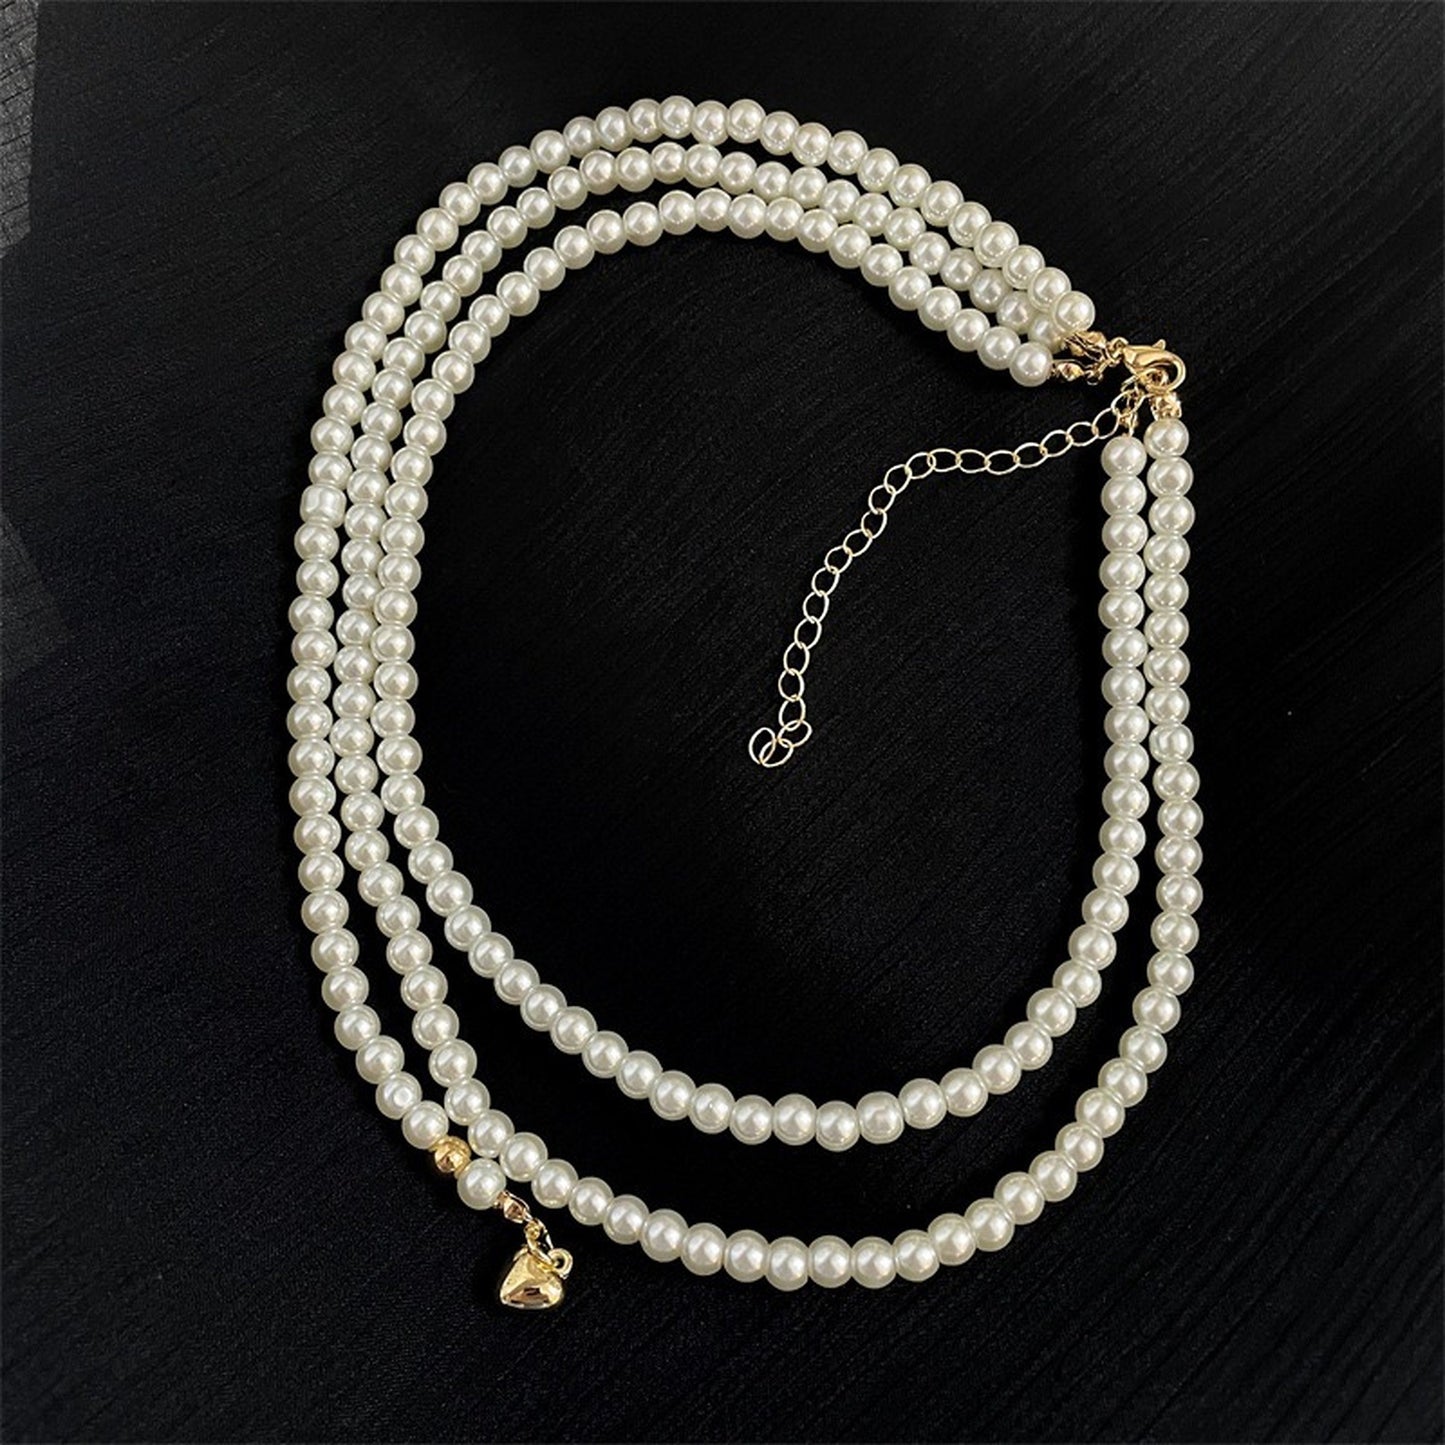 Layered Pearl Necklace, Bridal Wedding Pearl Jewelry, Multi Strand Pearl Beaded Necklace, Gatsby Vintage Necklace, Classic Pearl Necklace